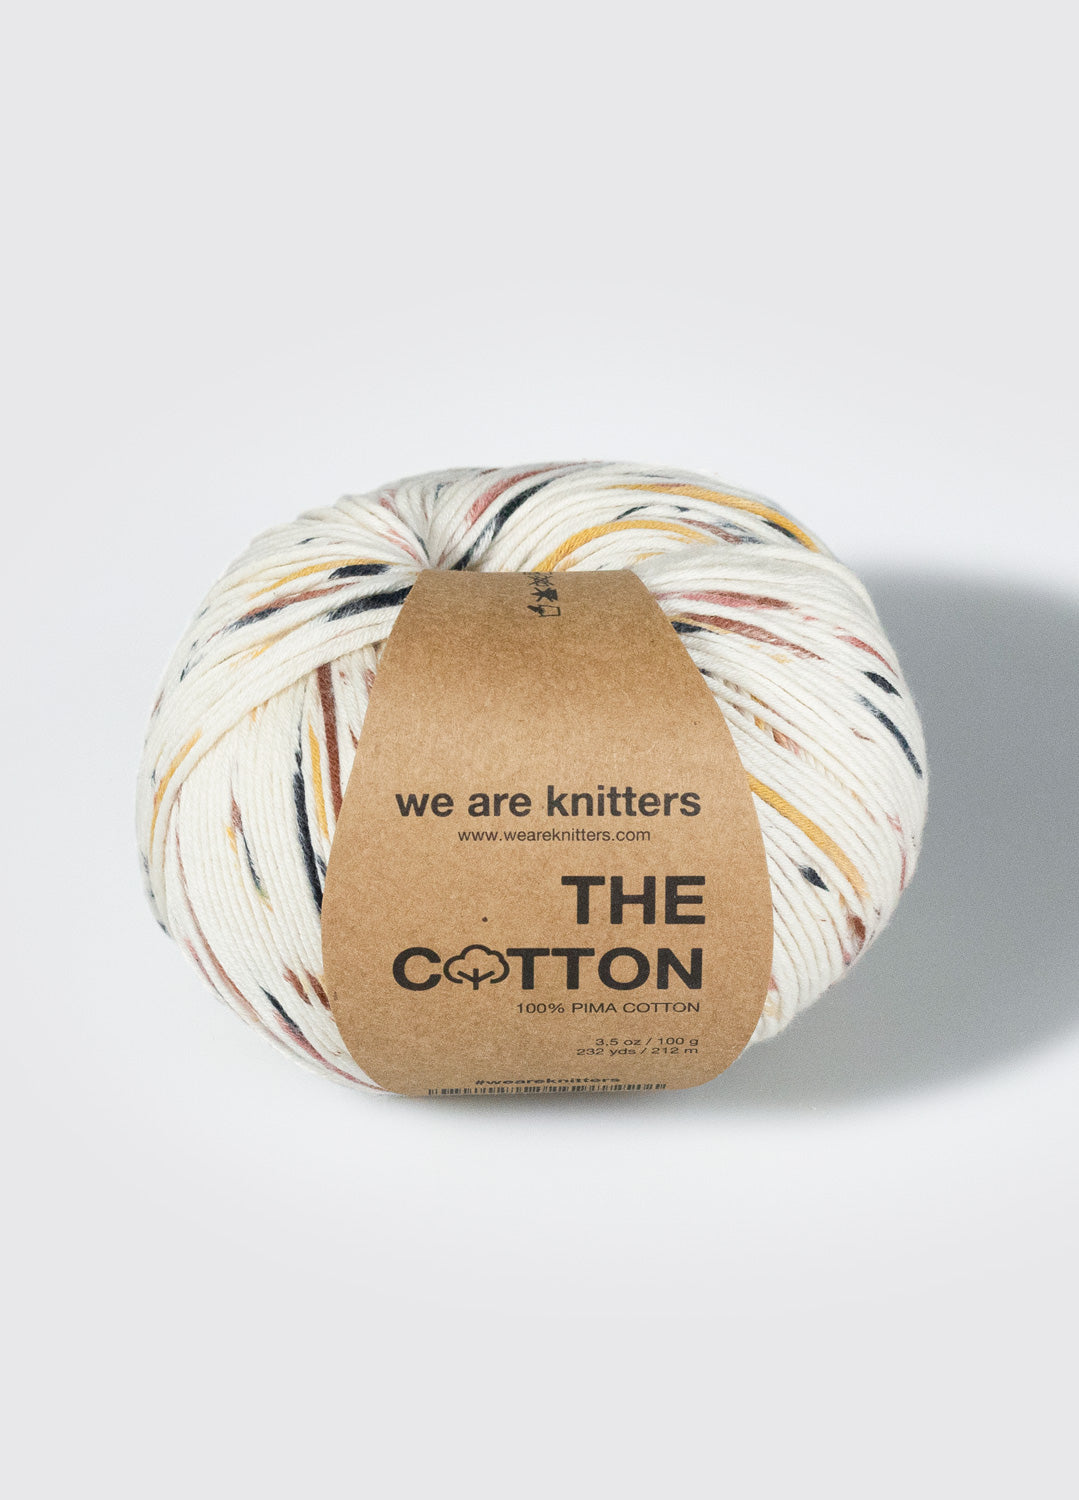 Baumwolle knitters are – We